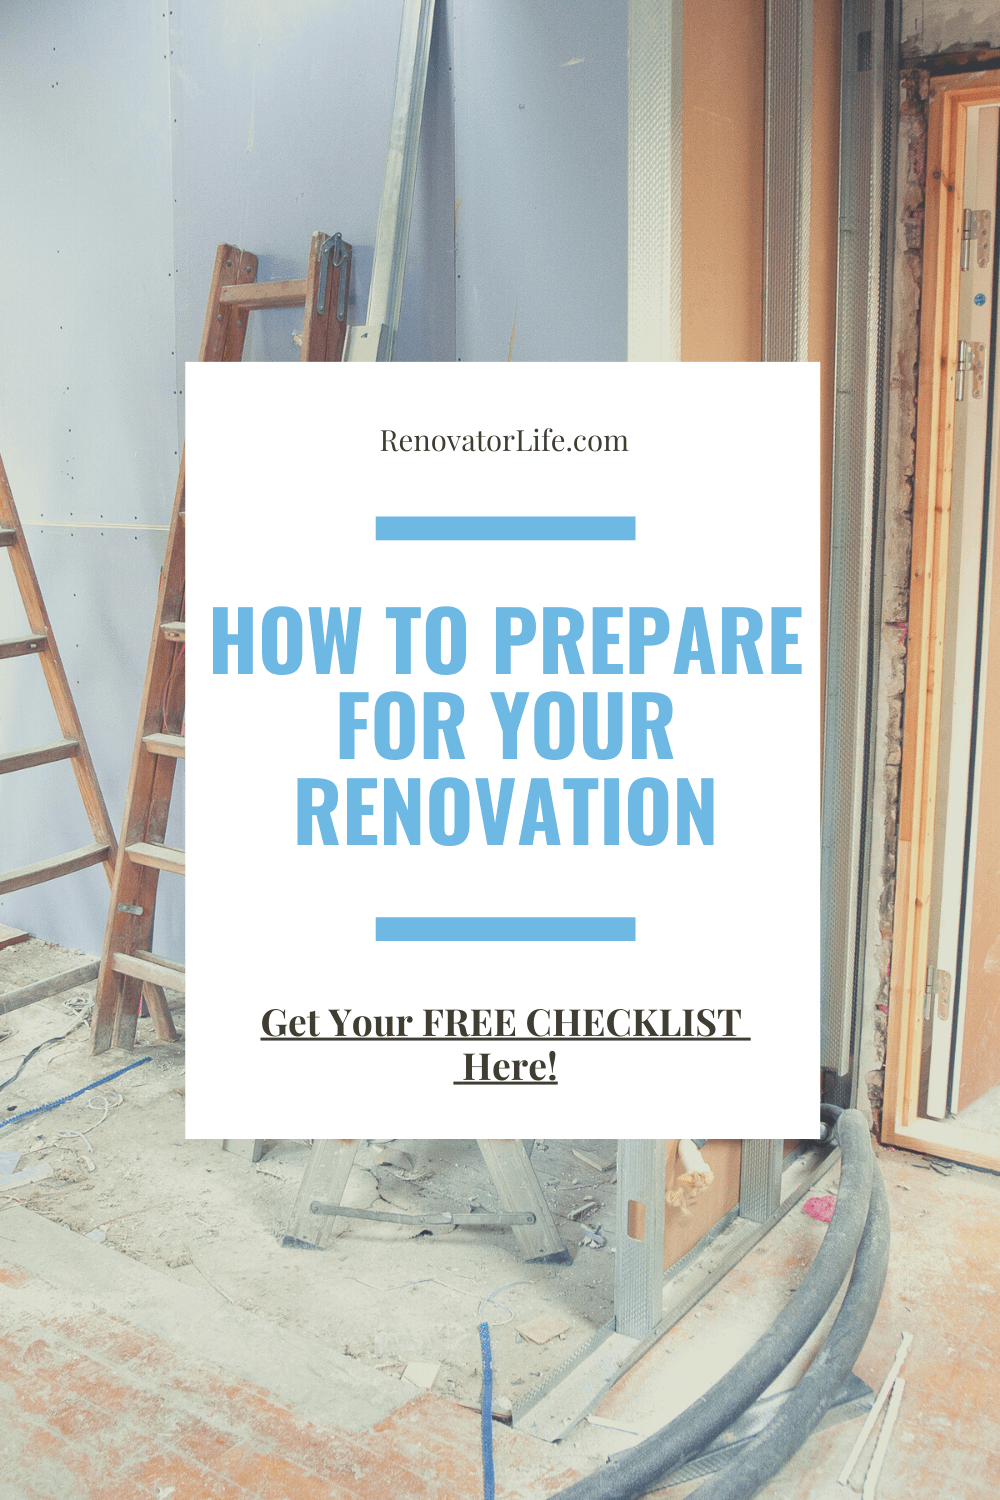 How to prepare for your renovation